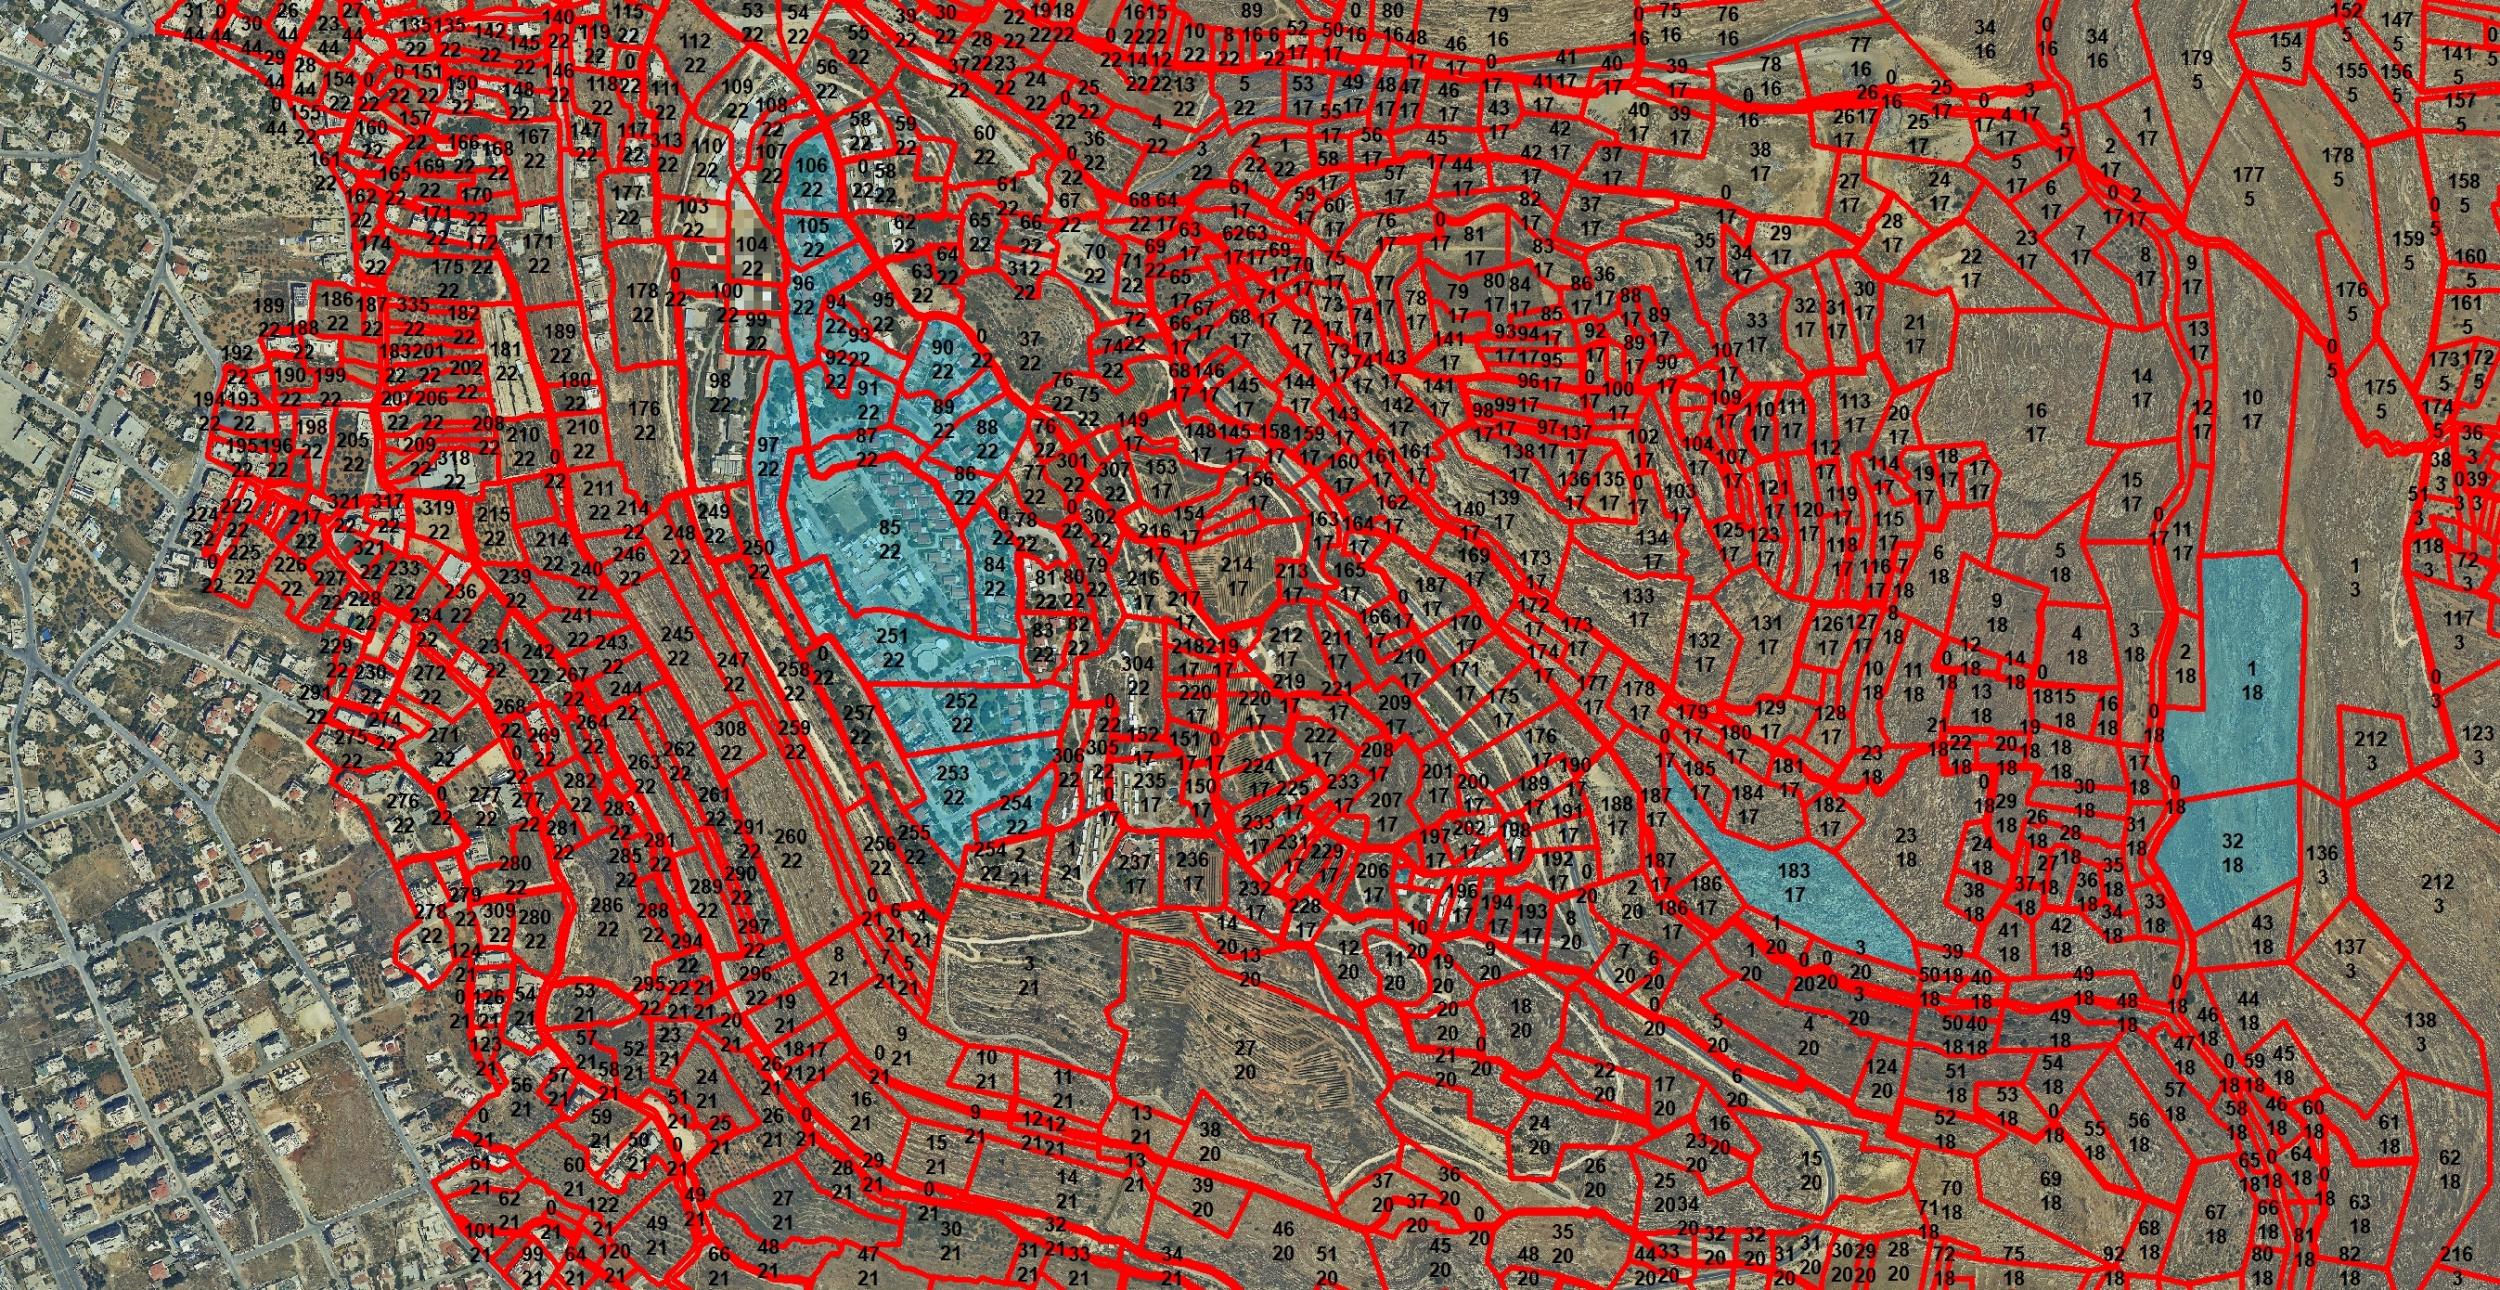 The lines in red show the parcels of Palestinian-owned land, many of which now lie under Psagot vineyard in the settlement, which lie east of the area marked in blue